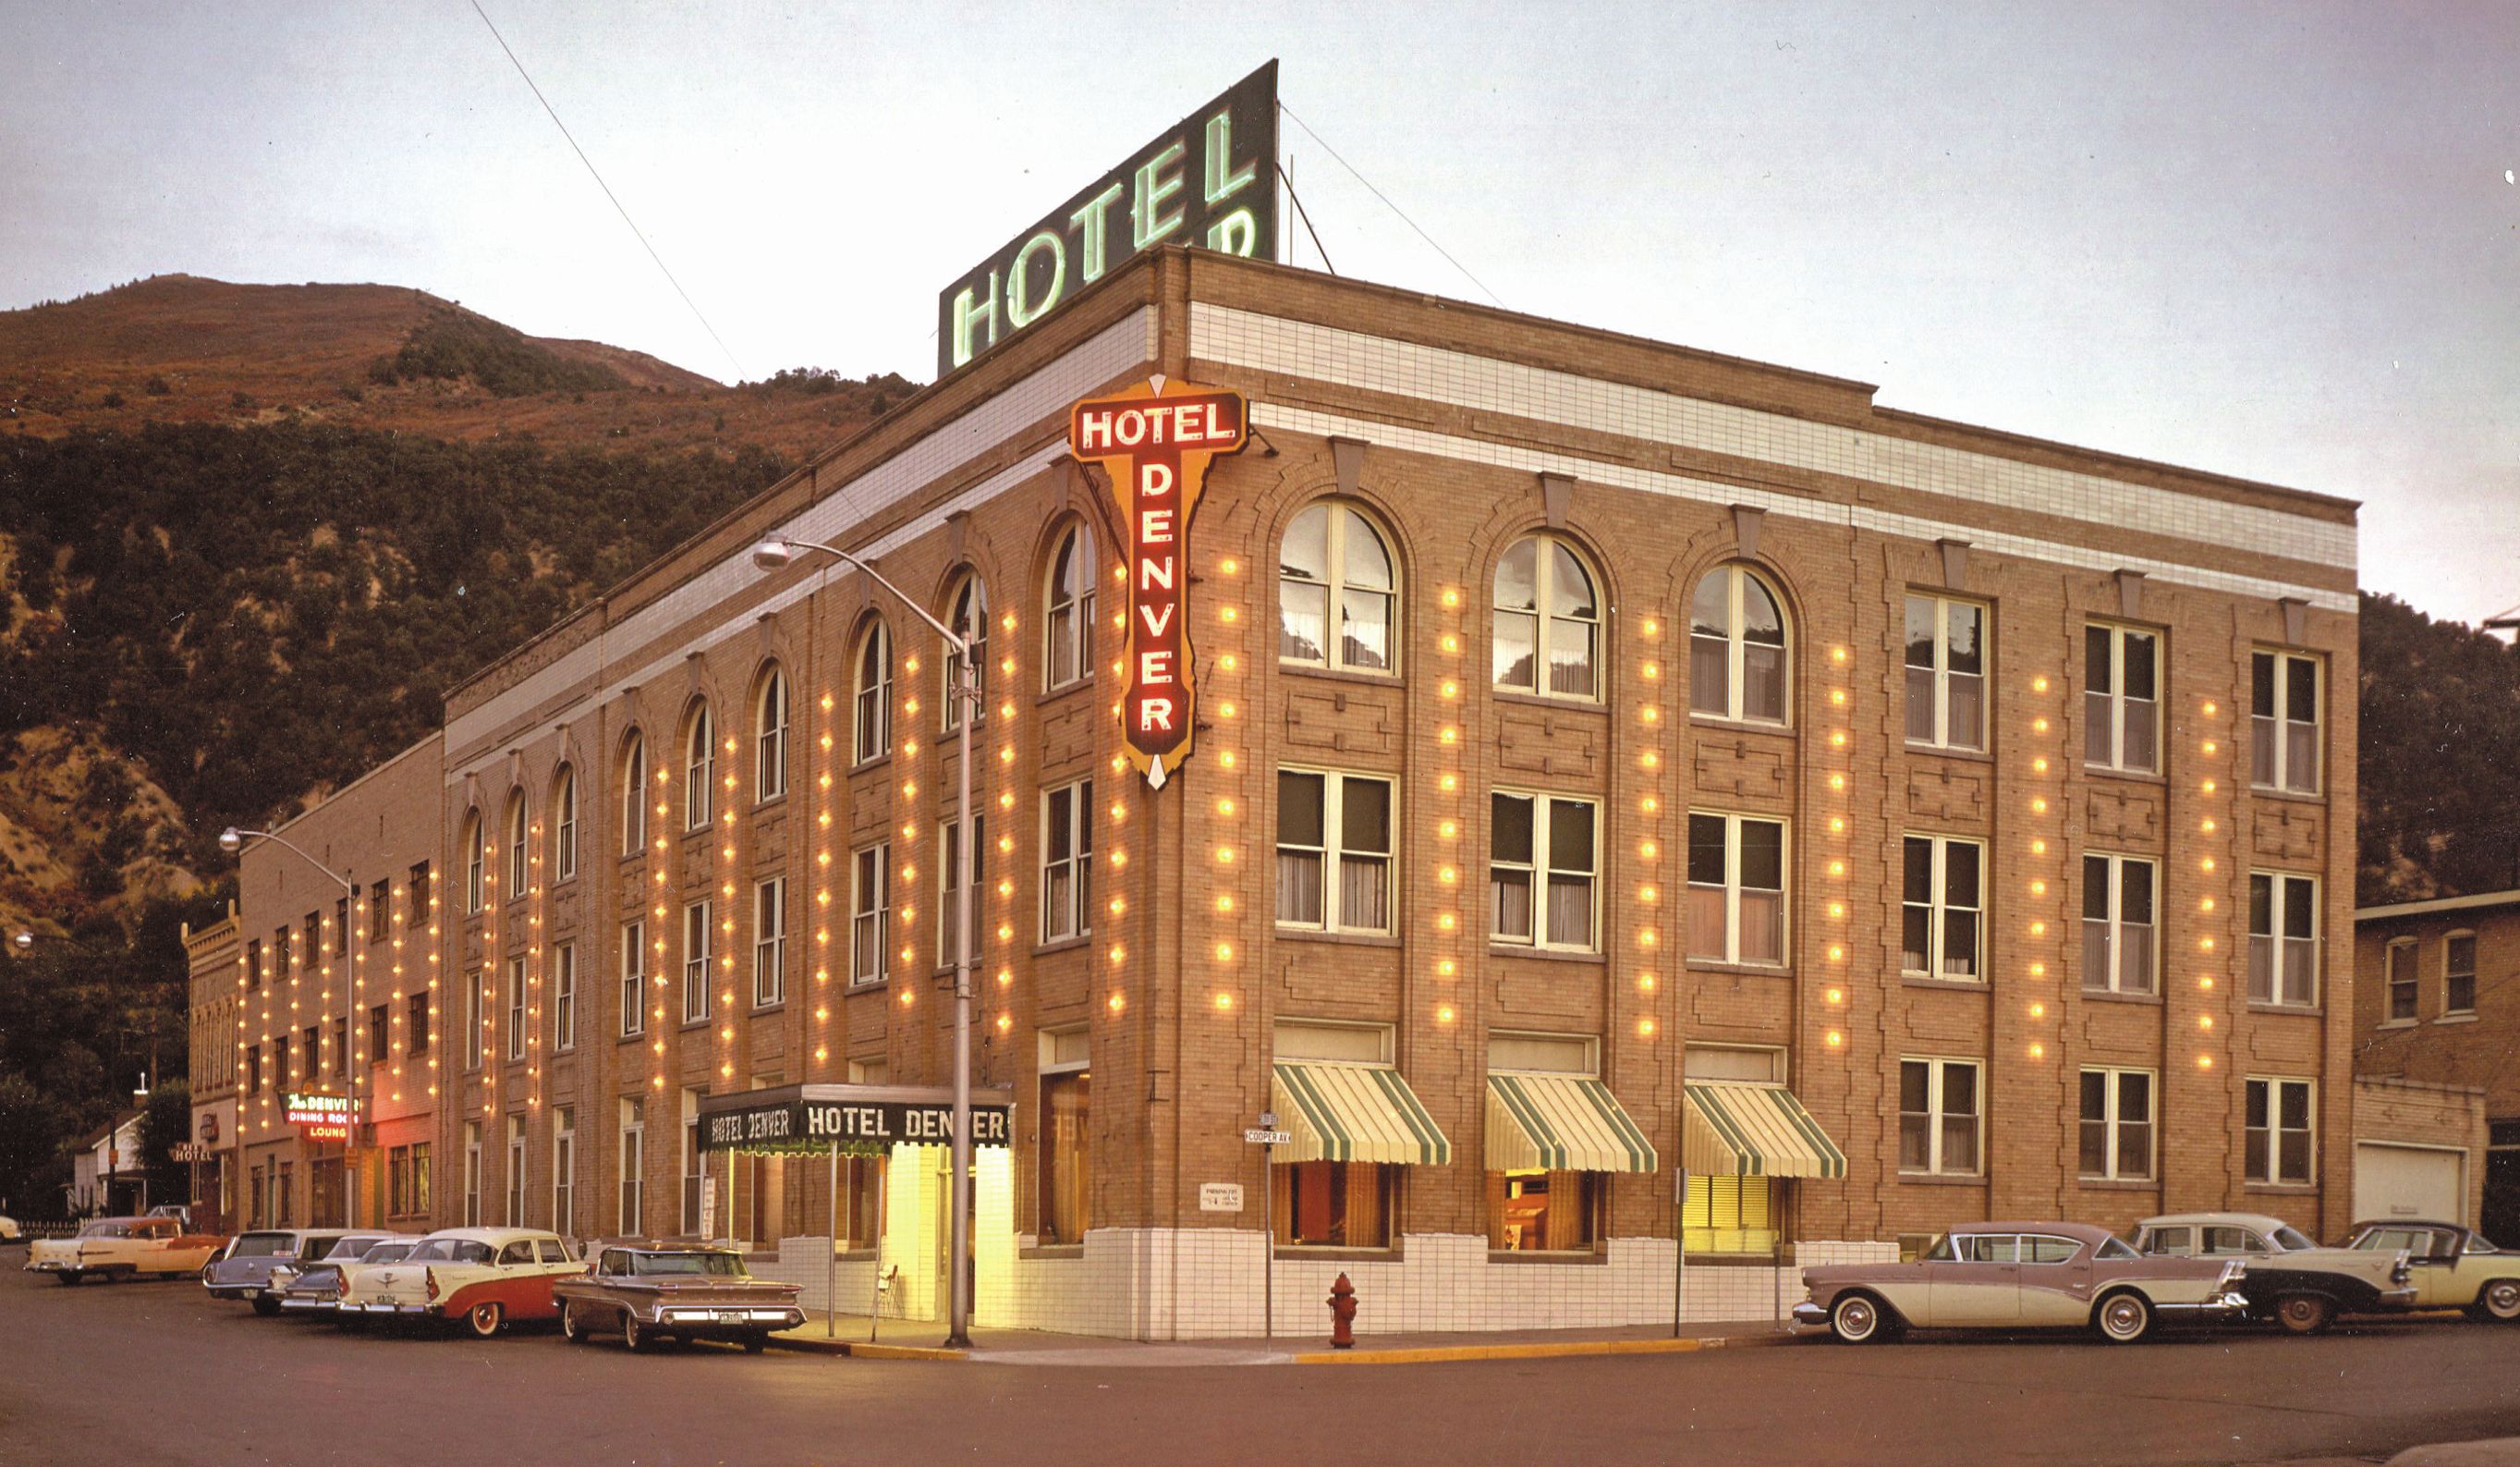 The Hotel Denver hosted famous and infamous guests in the 1930s, including Clark Gable and gangster "Diamond Jack" Alterie.